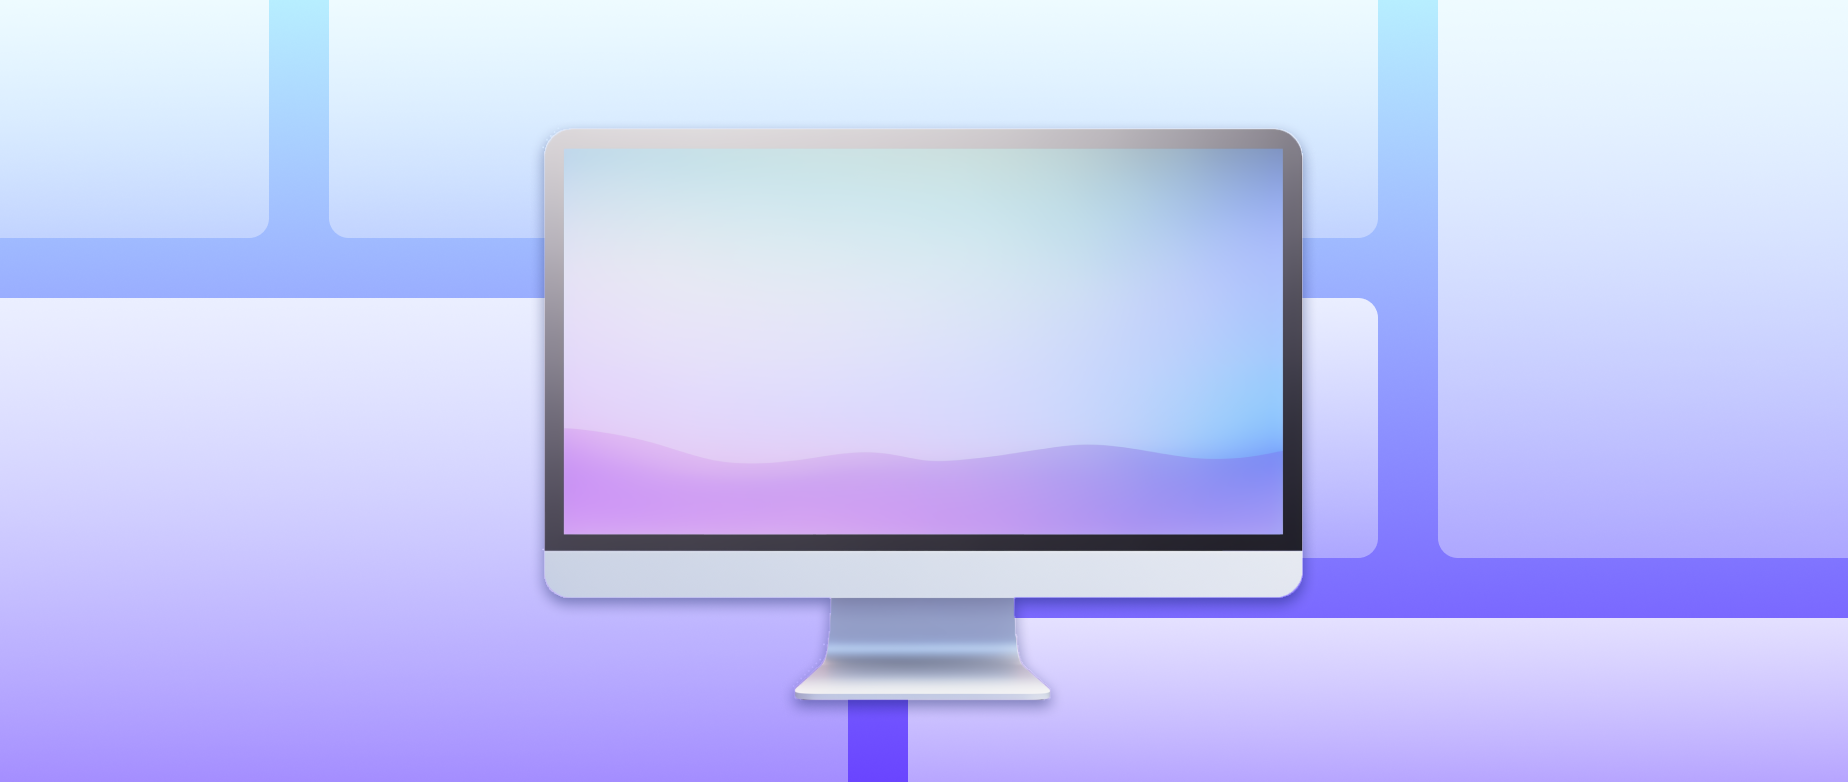 An iMac computer screen on a background of image boxes of various dimensions.